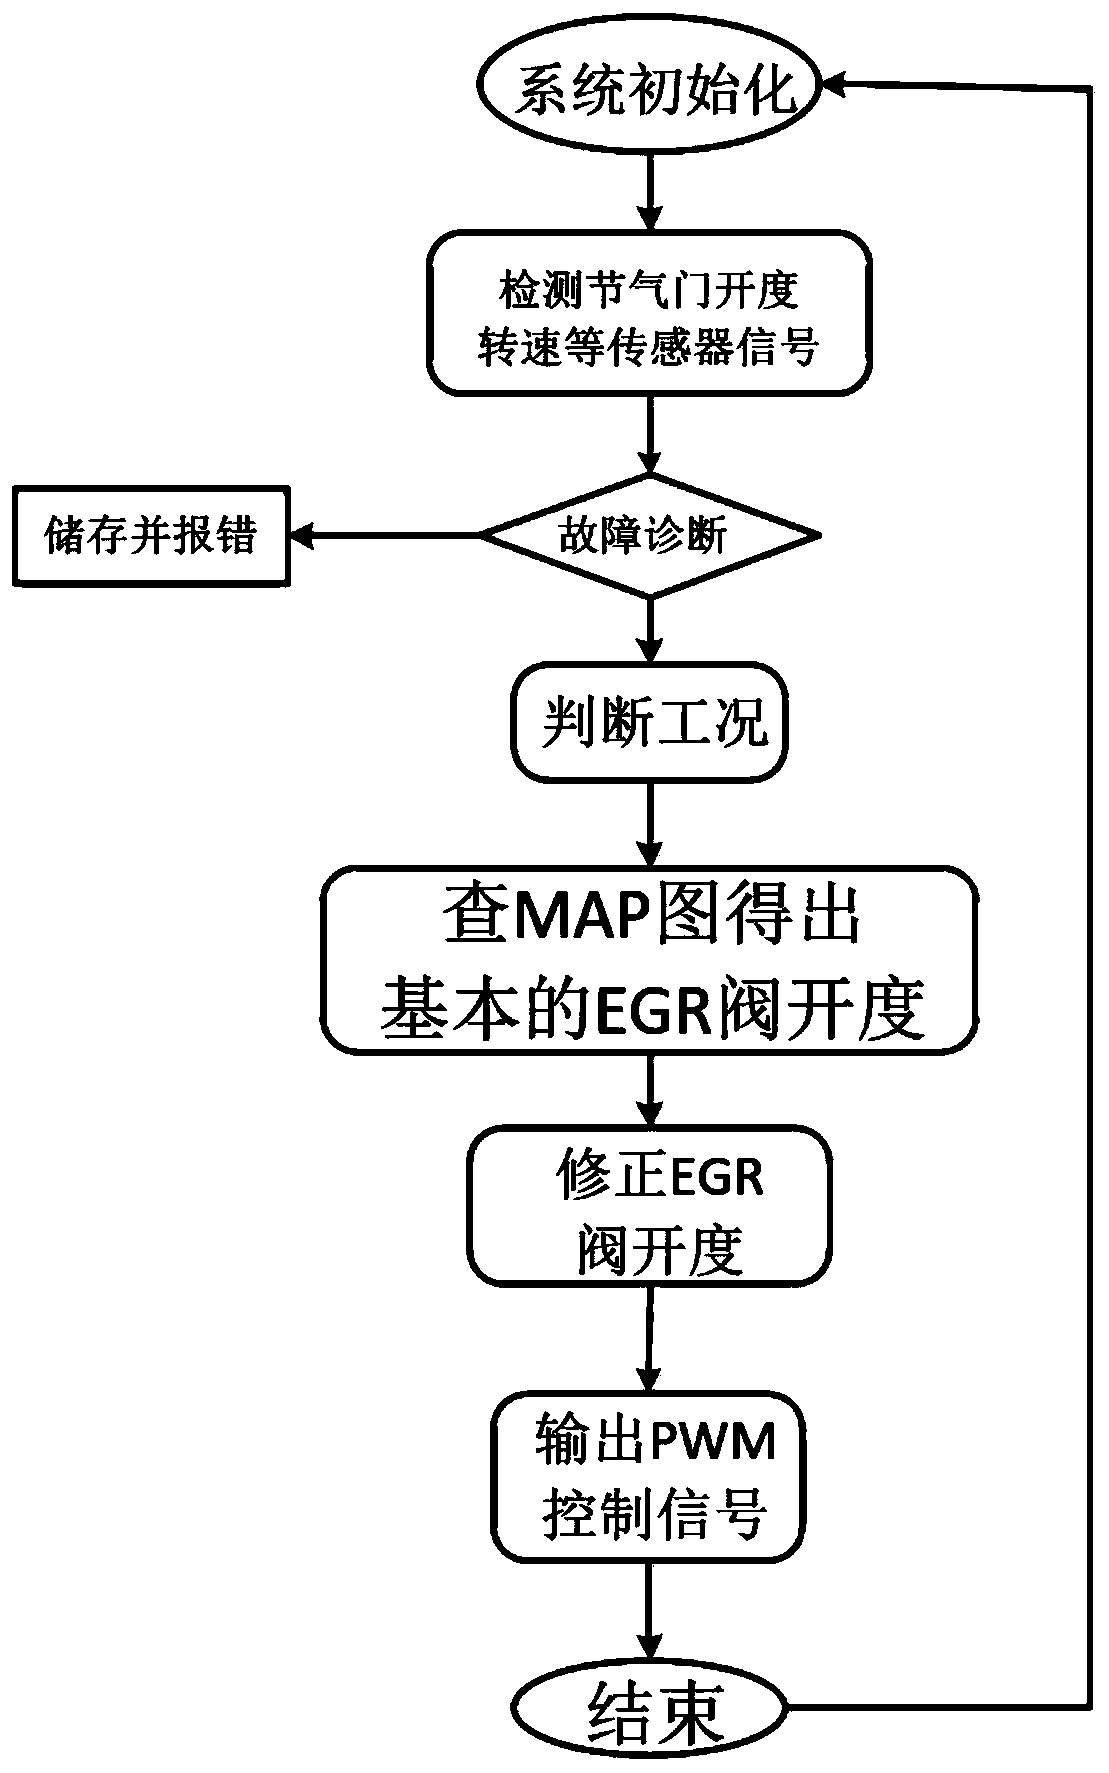 Control method for realizing precontrol EGR system